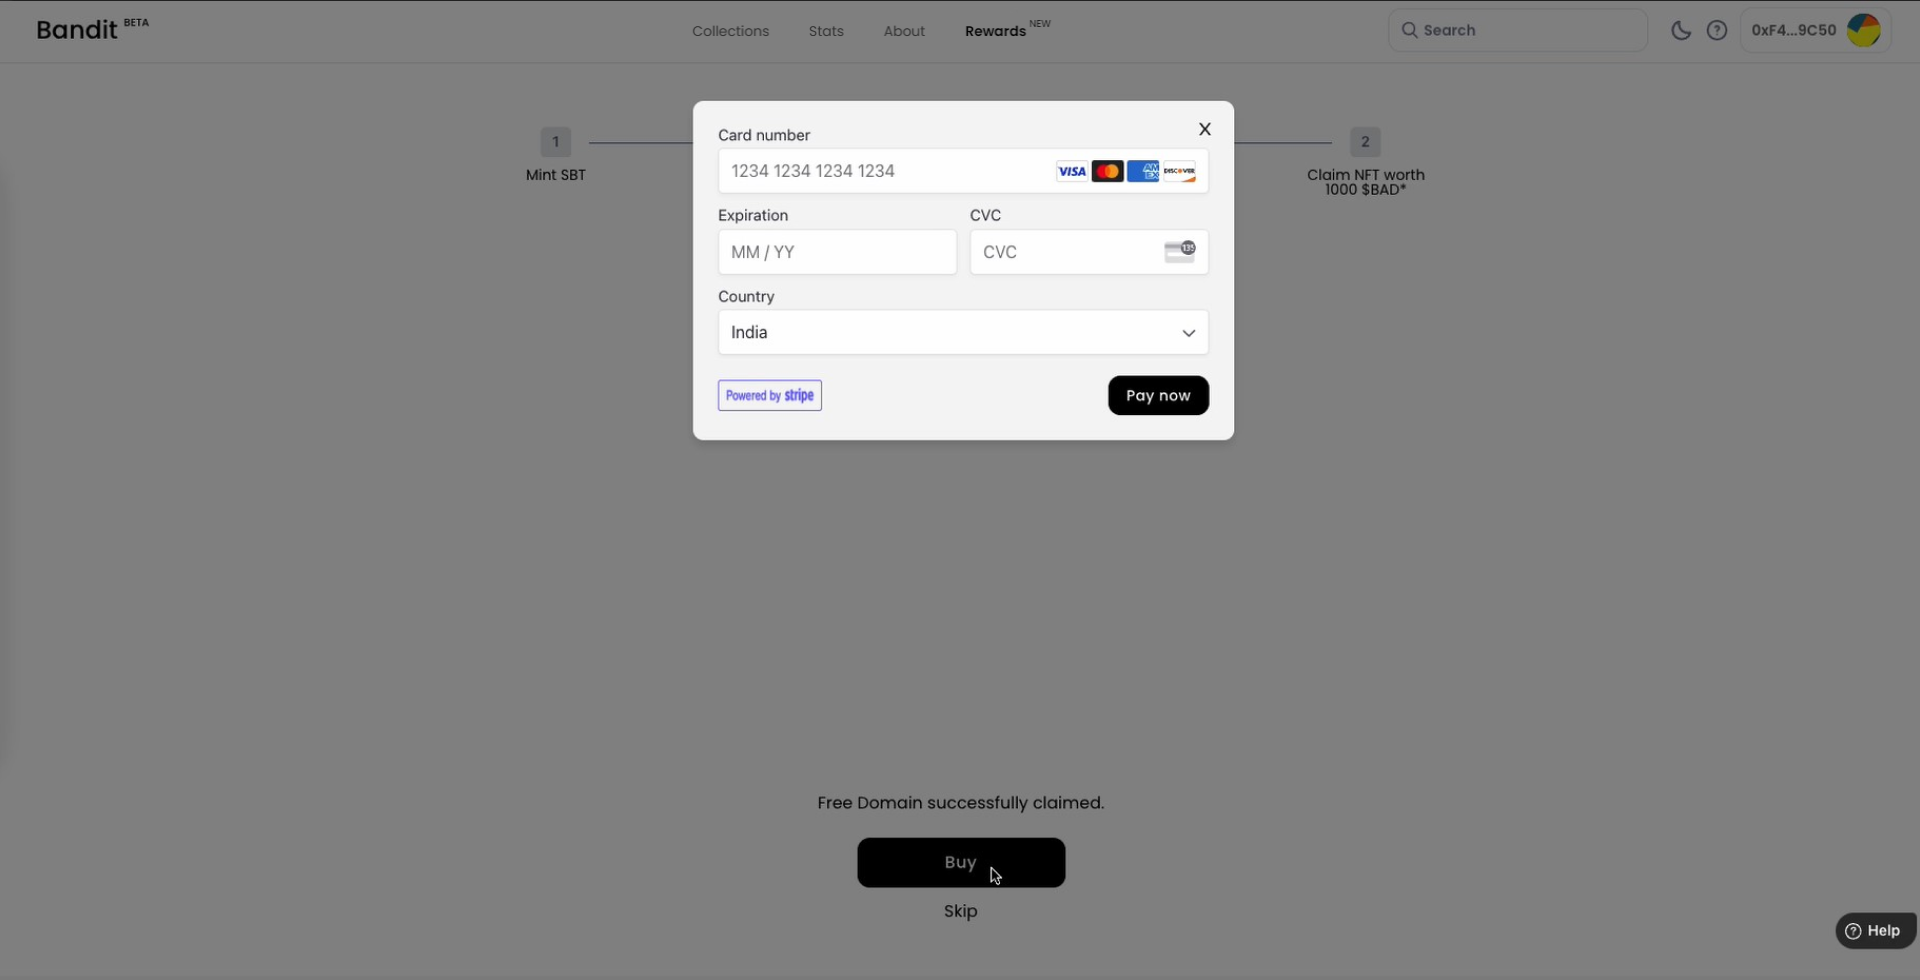 Enter your card details to complete the purchase.